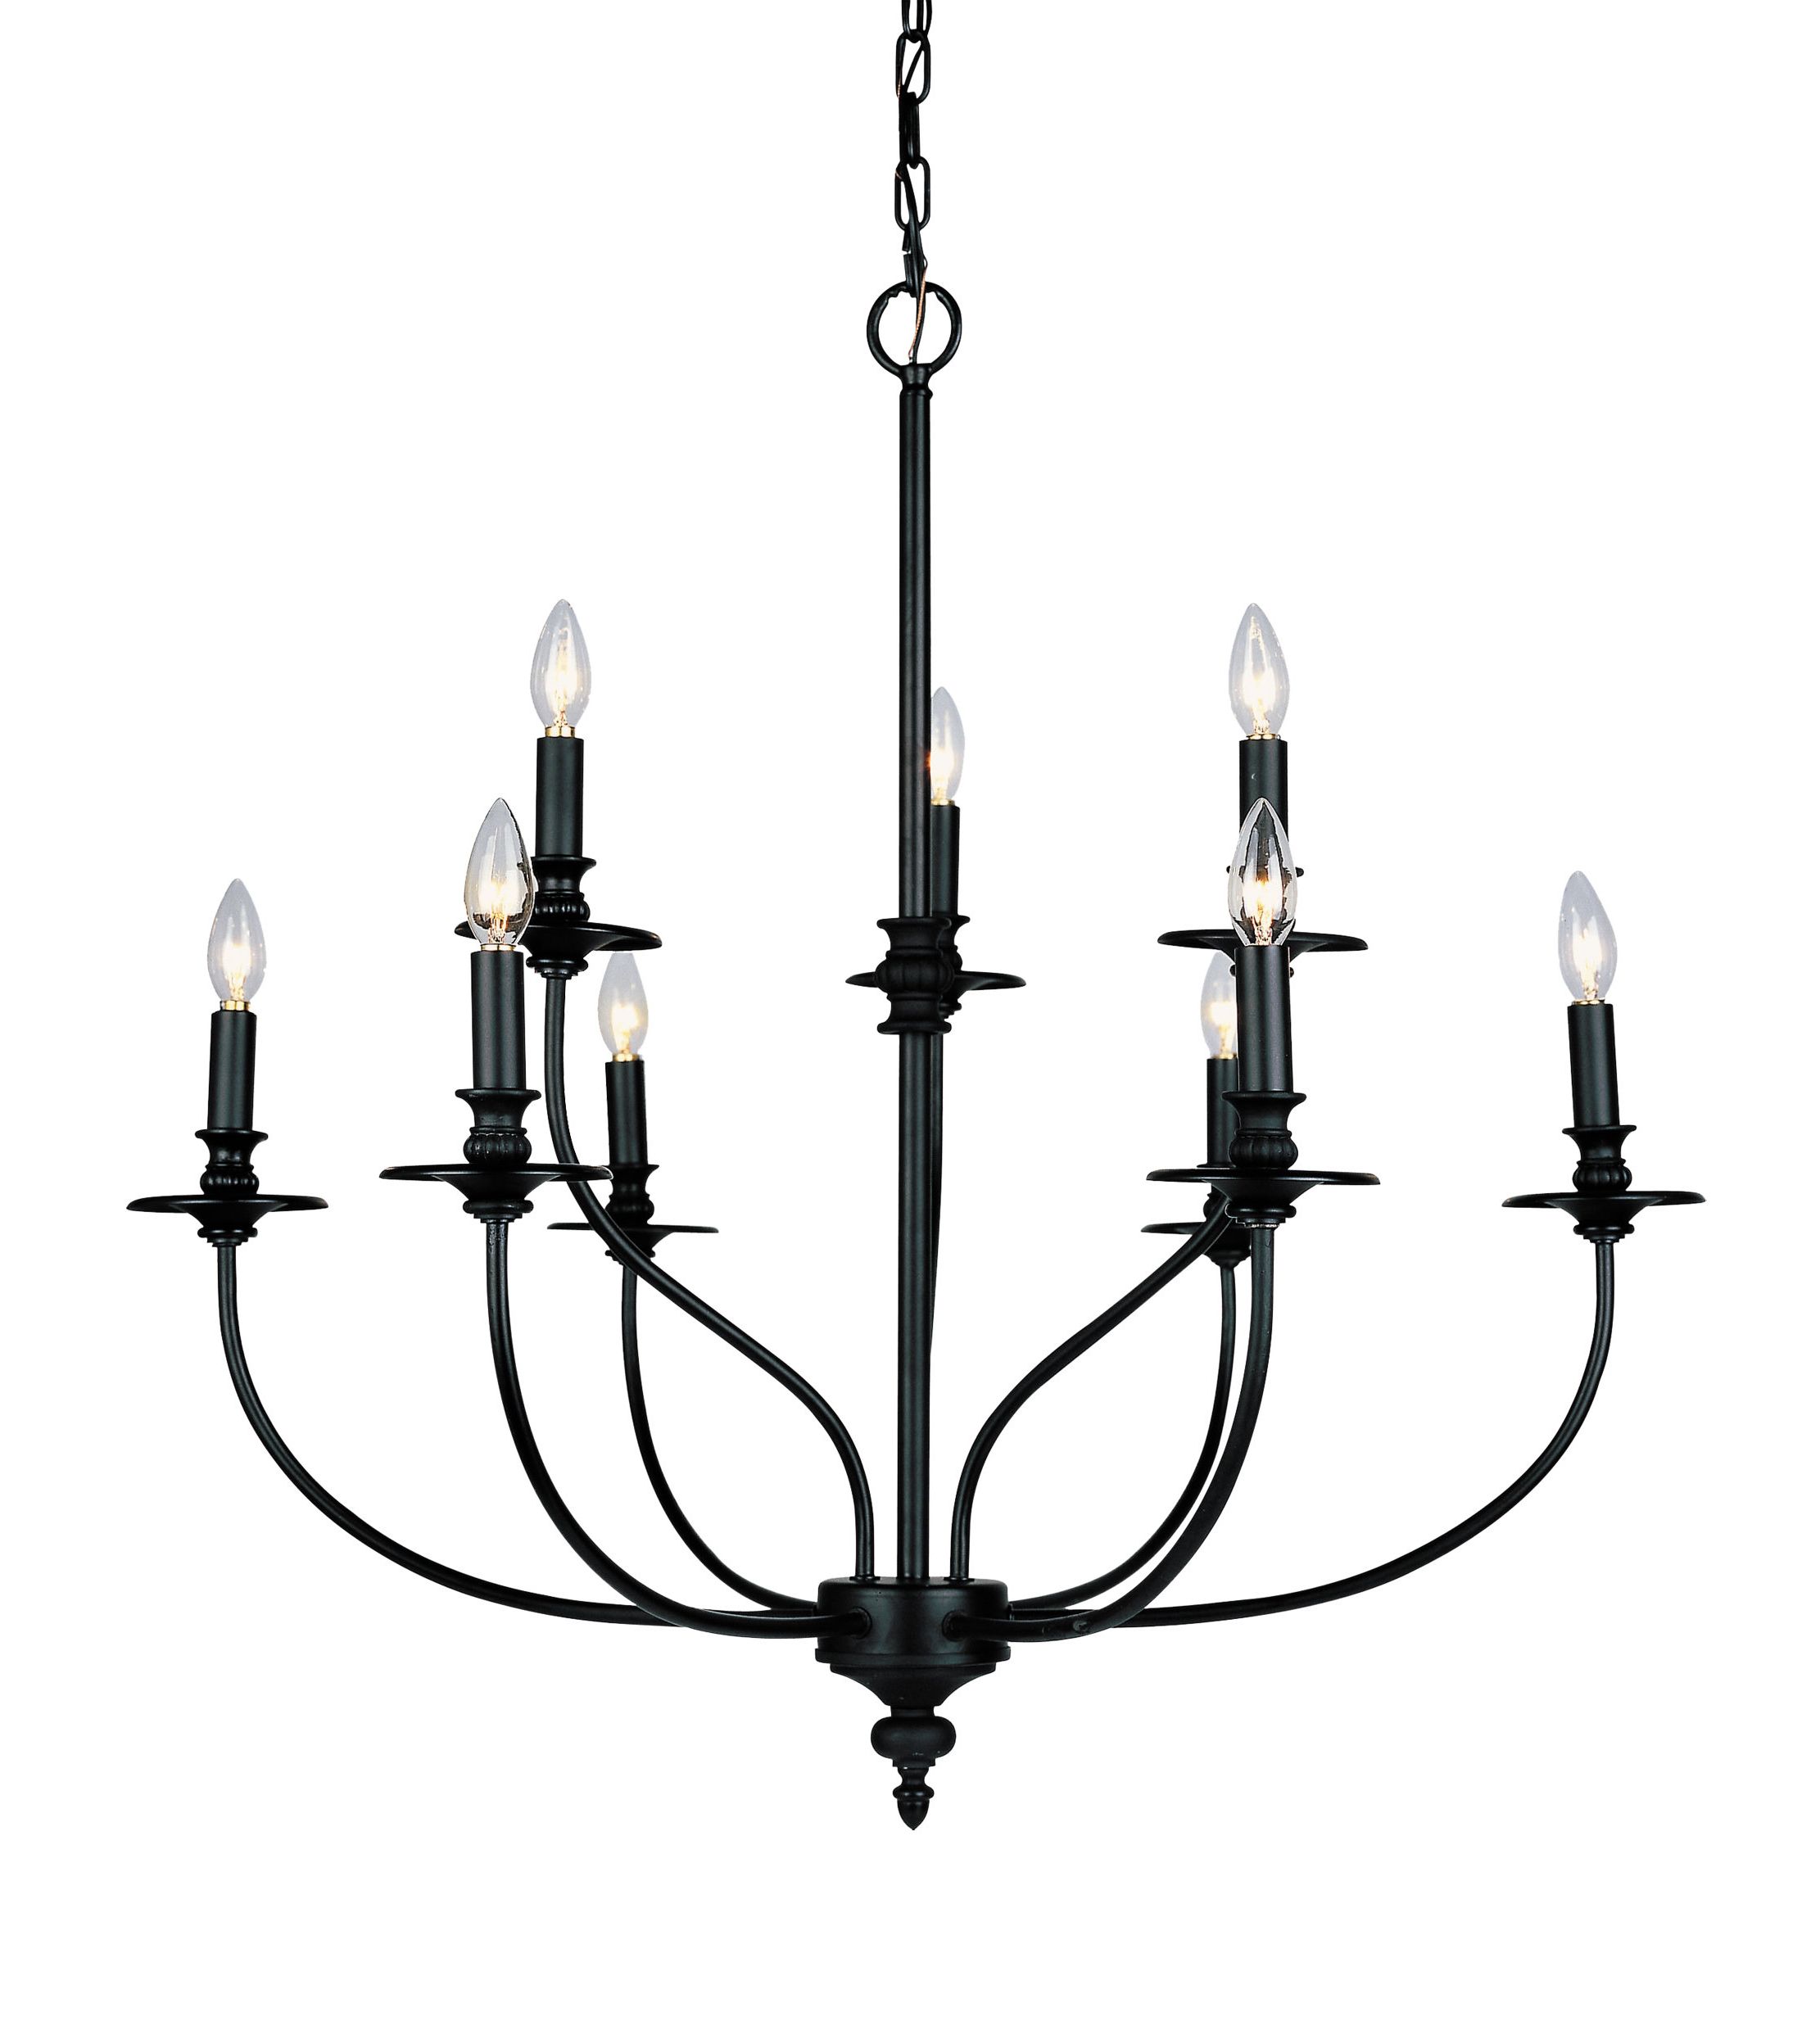 Giverny 9 Light Candle Style Chandelier With Regard To 2019 Kenedy 9 Light Candle Style Chandeliers (View 4 of 25)